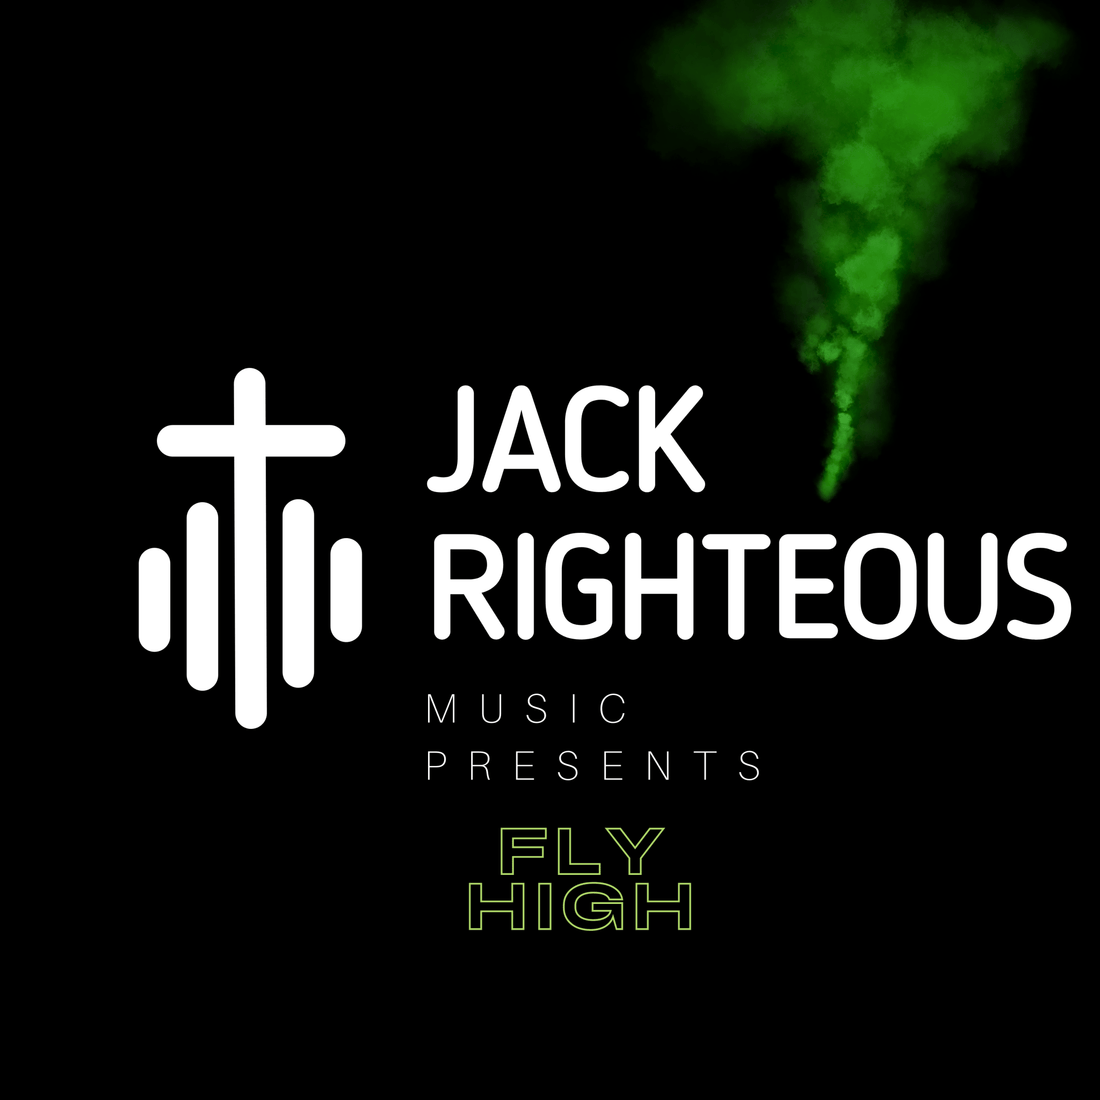 Jack Righteous Releases 'Fly High': A Reggae-Hip-Hop Fusion Chill Vibe - Jack Righteous